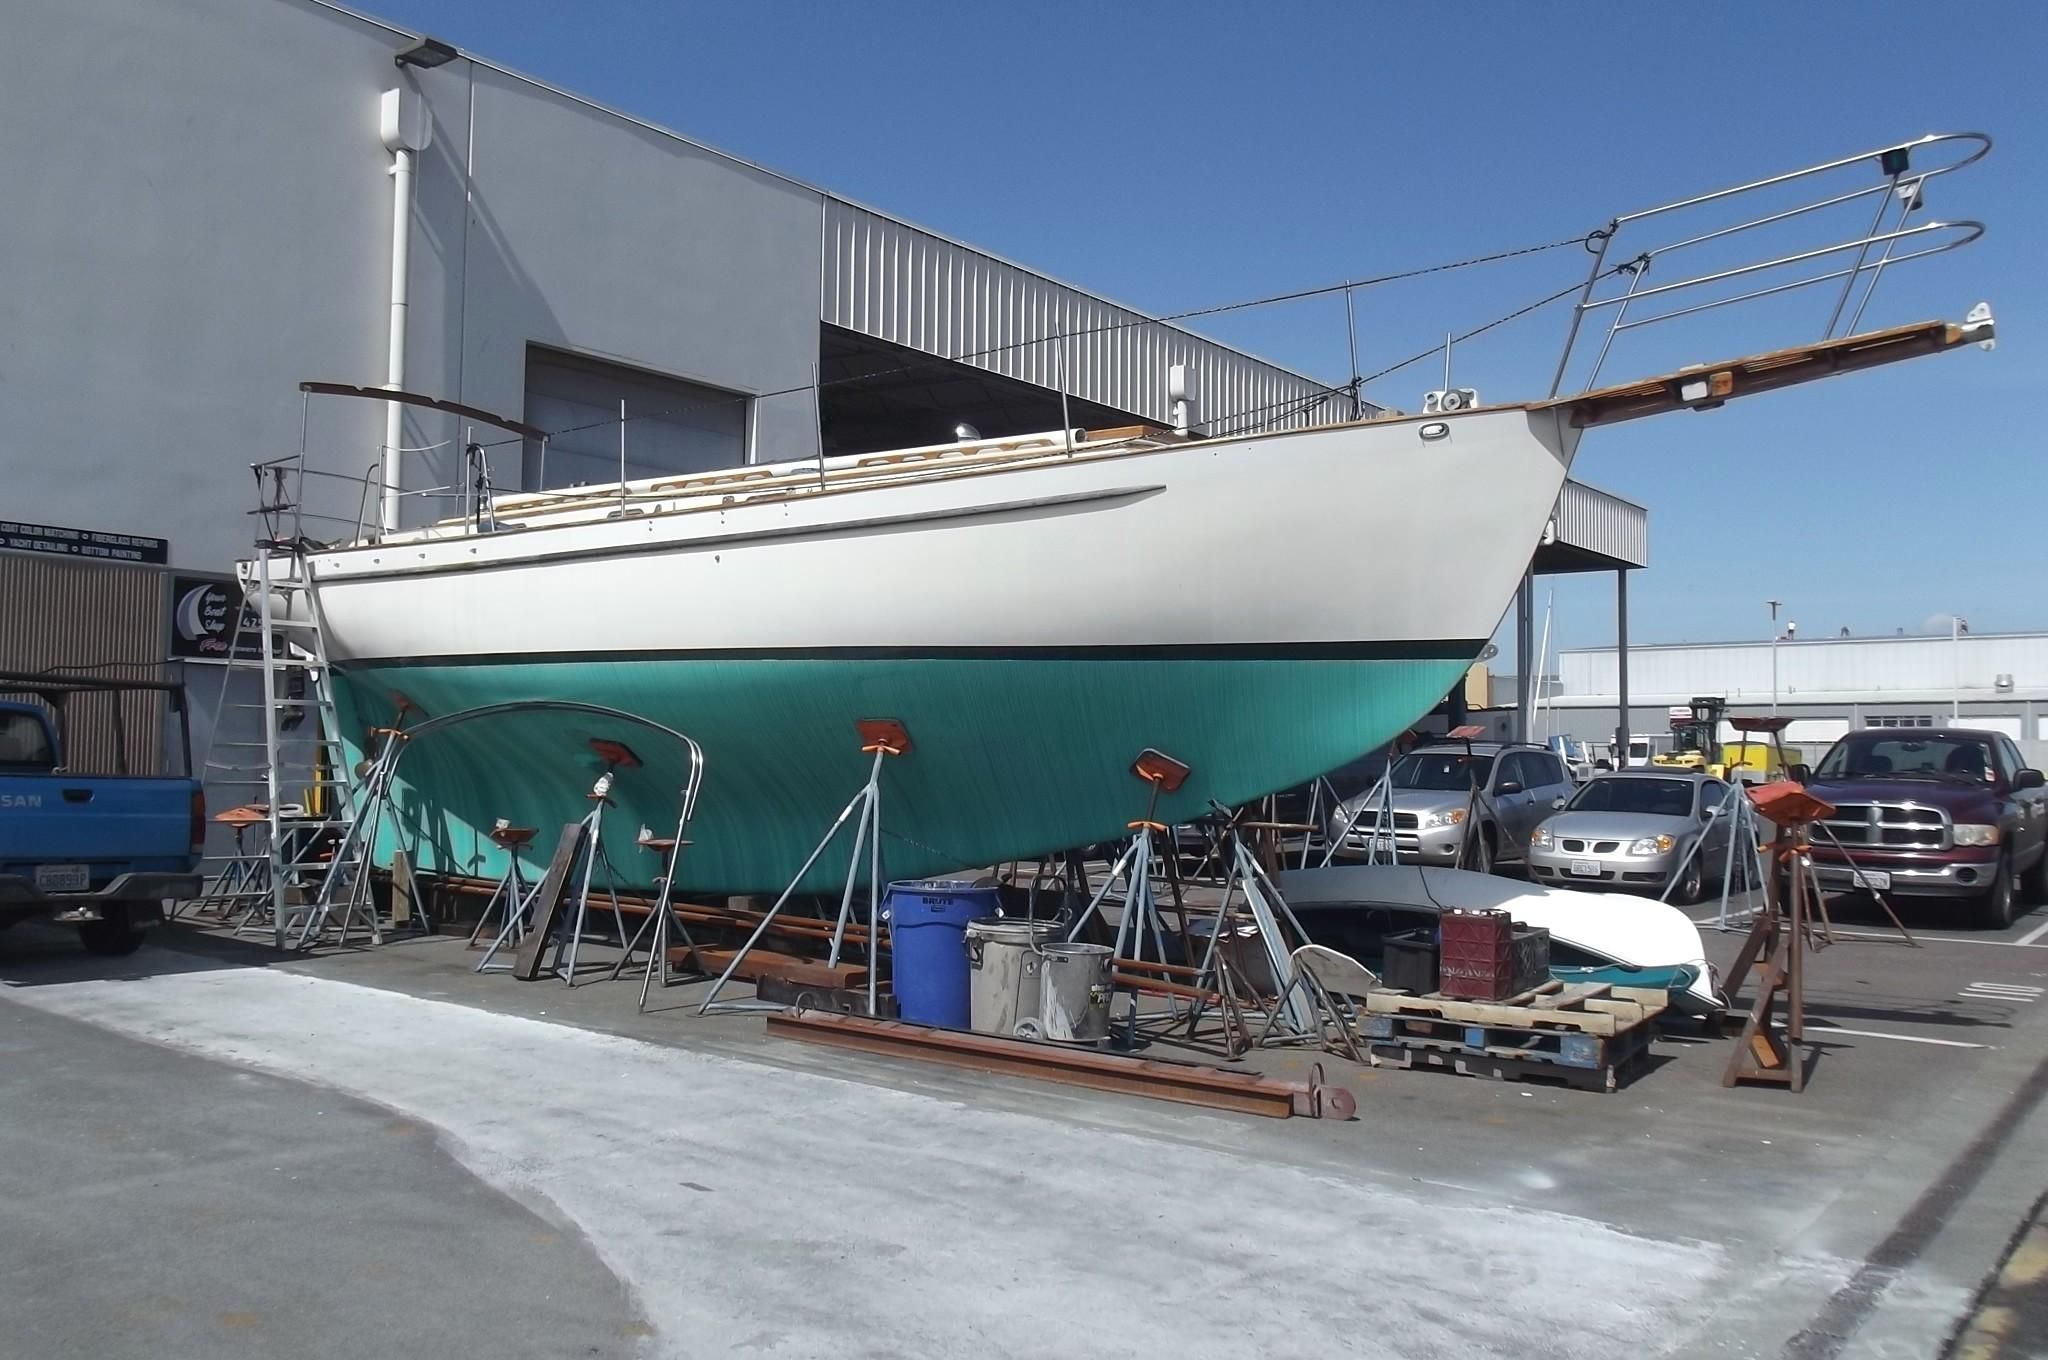 cape george 36 sailboat for sale